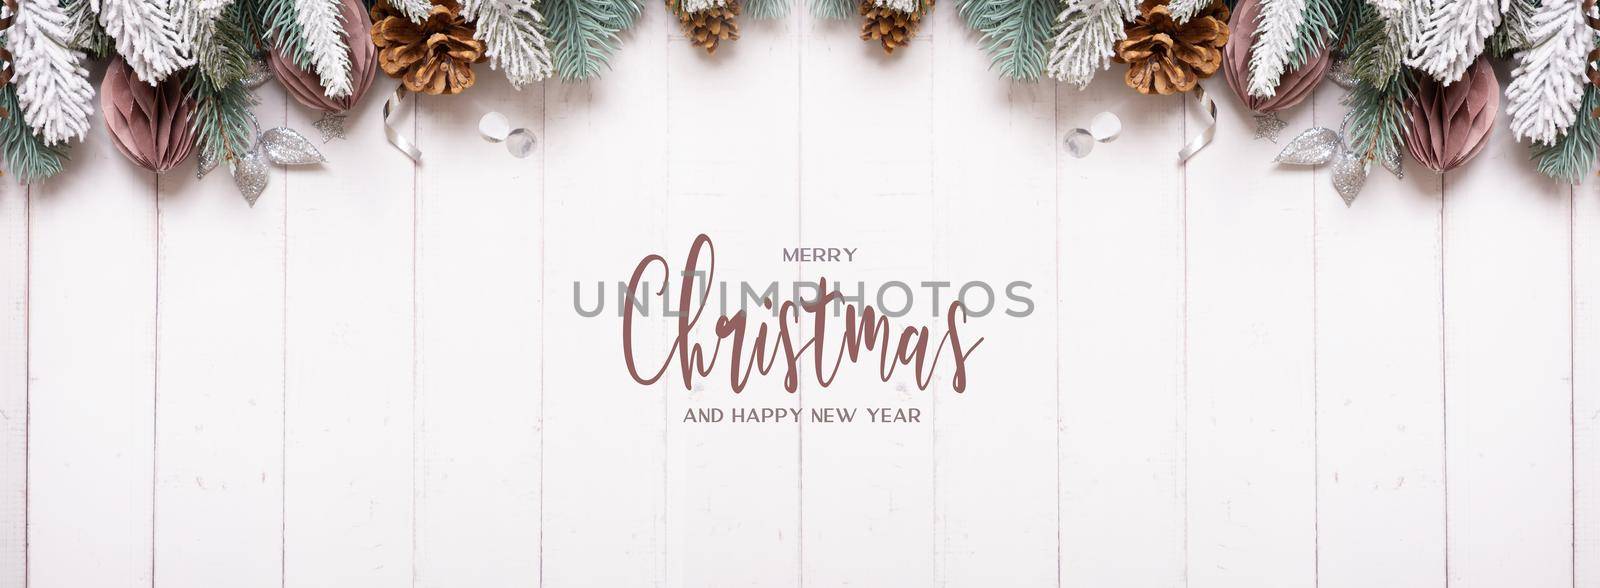 Merry Christmas and Happy New Year text greeting banner with flat lay composition from pine, cones, balls on wooden background.